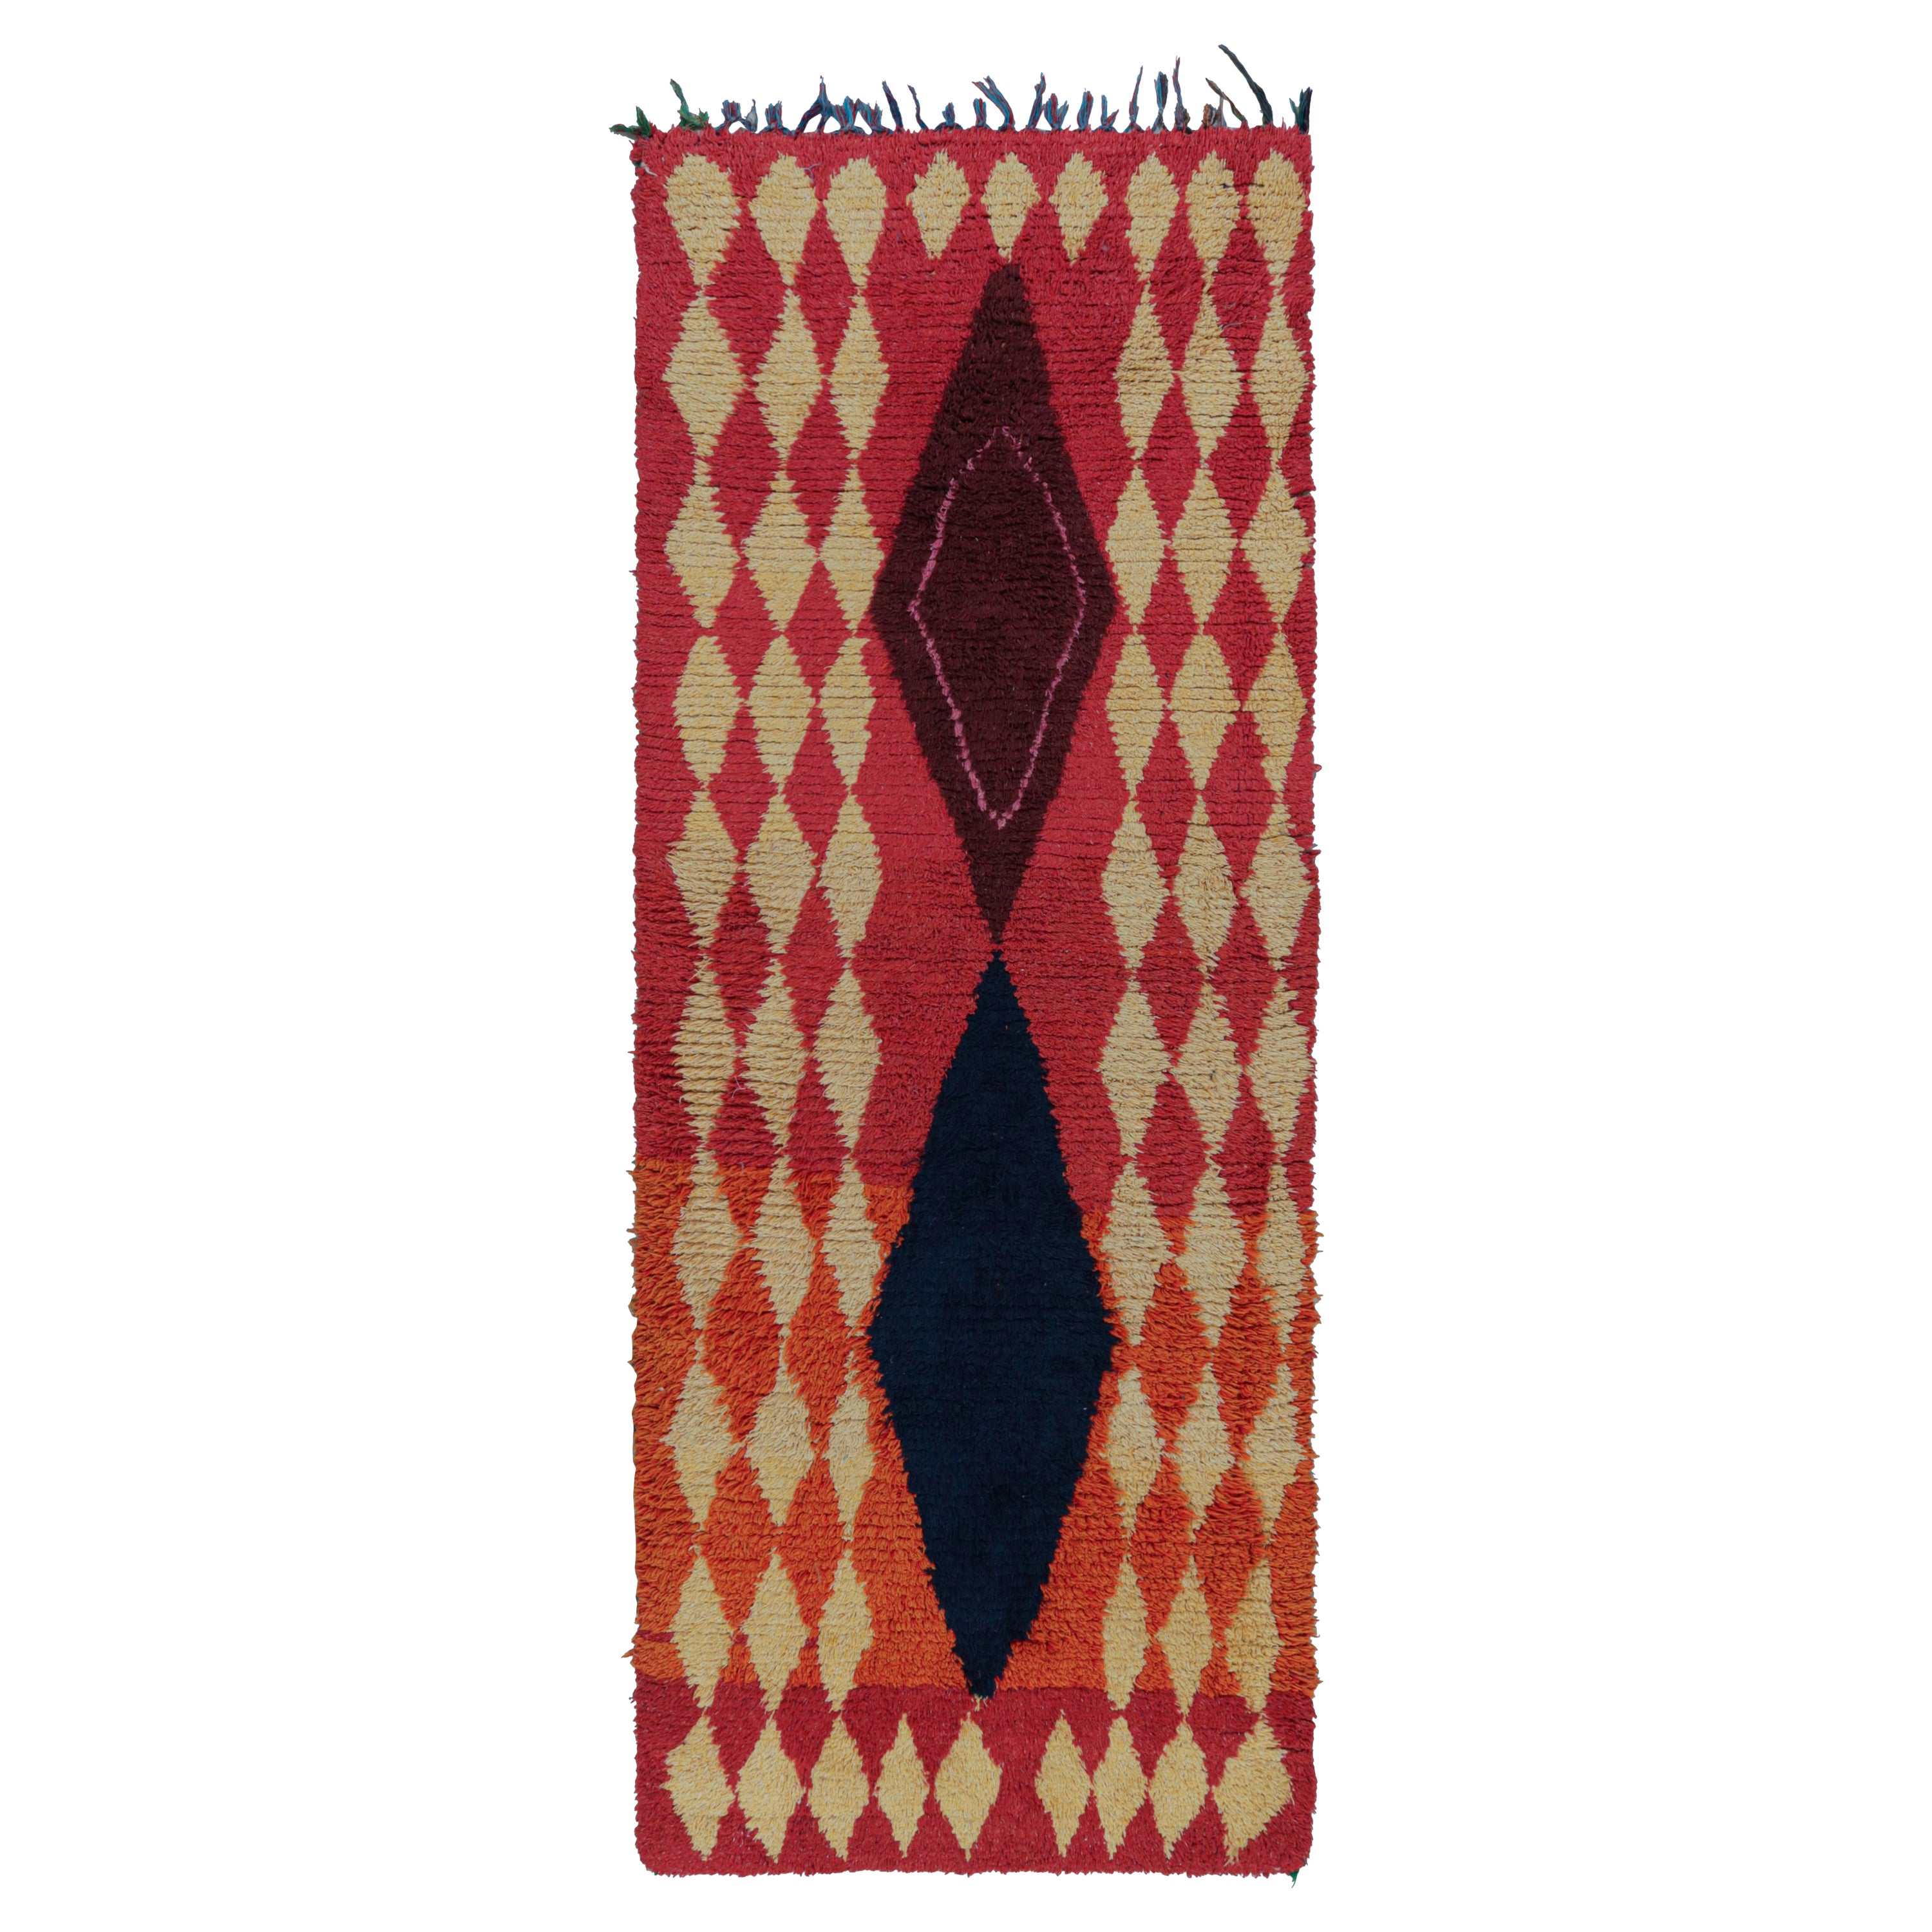 1950s Azilal Moroccan runner rug in Polychromatic Tribal Patterns by Rug & Kilim For Sale